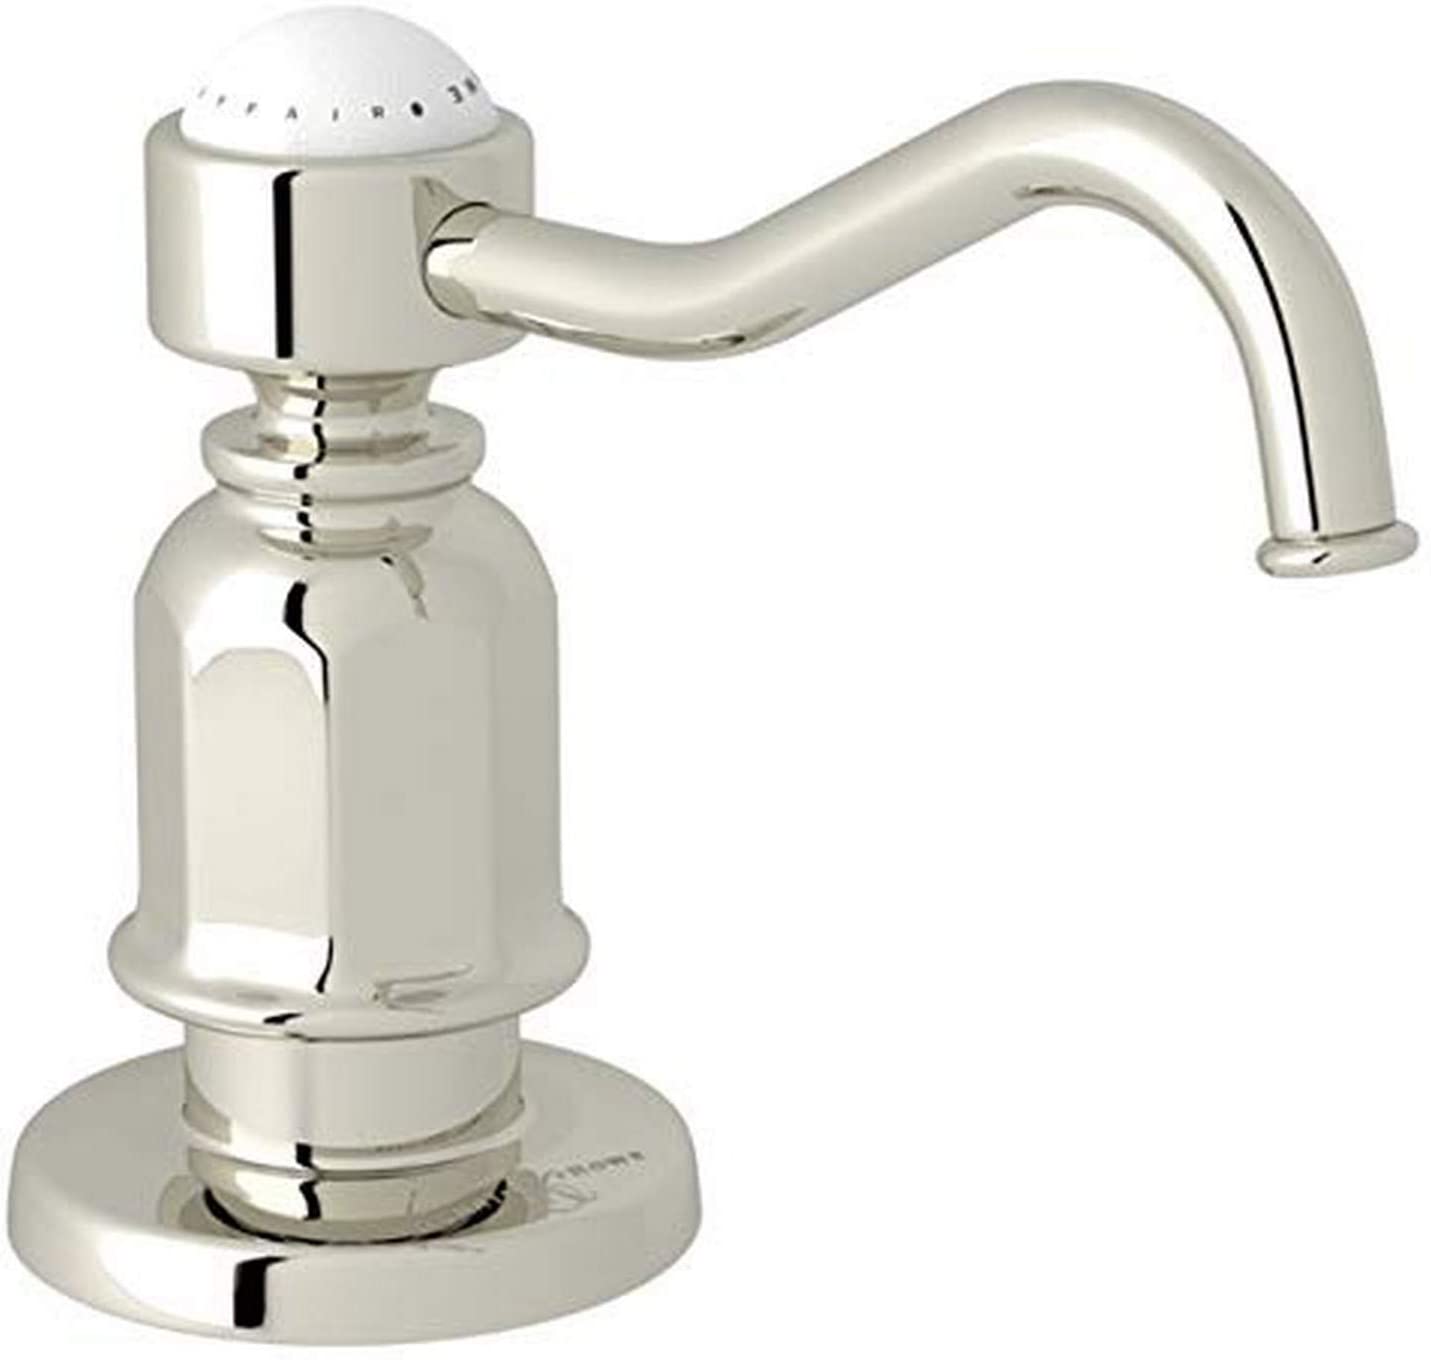 Perrin & Rowe Traditional Soap Dispenser in Polished Nickel